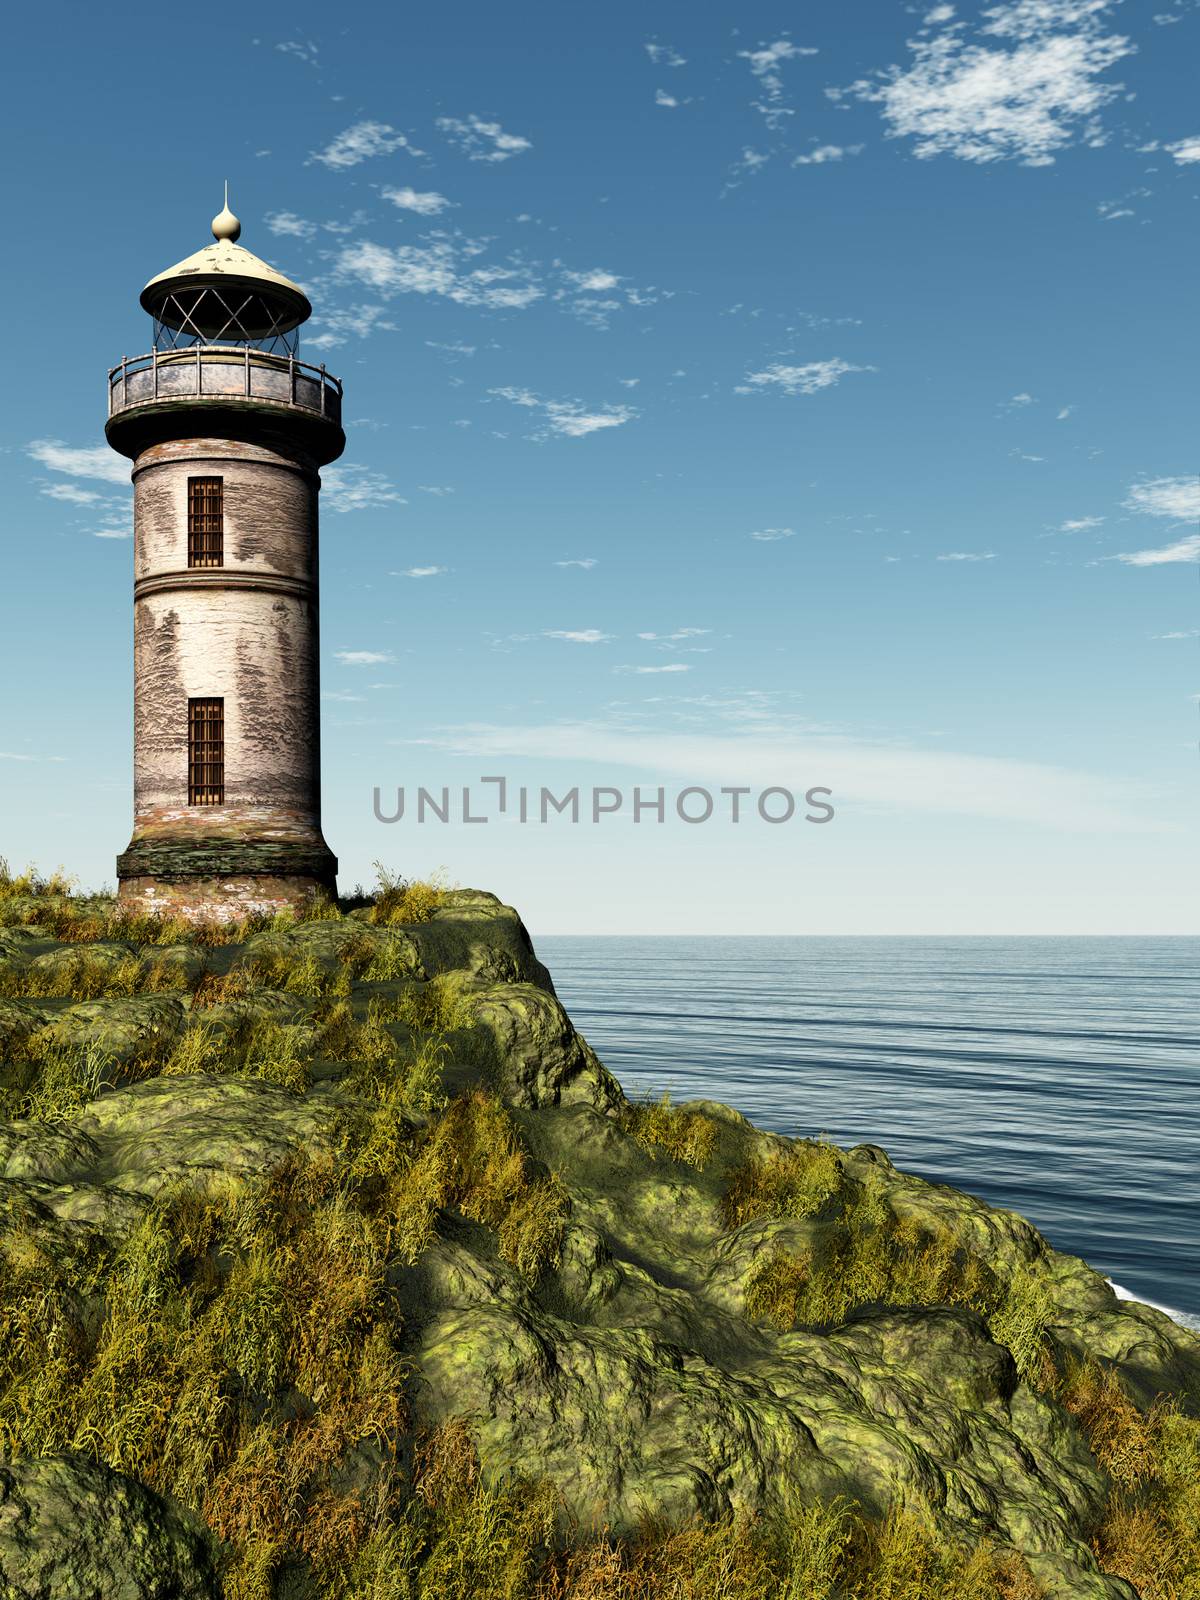 This image shows a old lighthouse with ocean